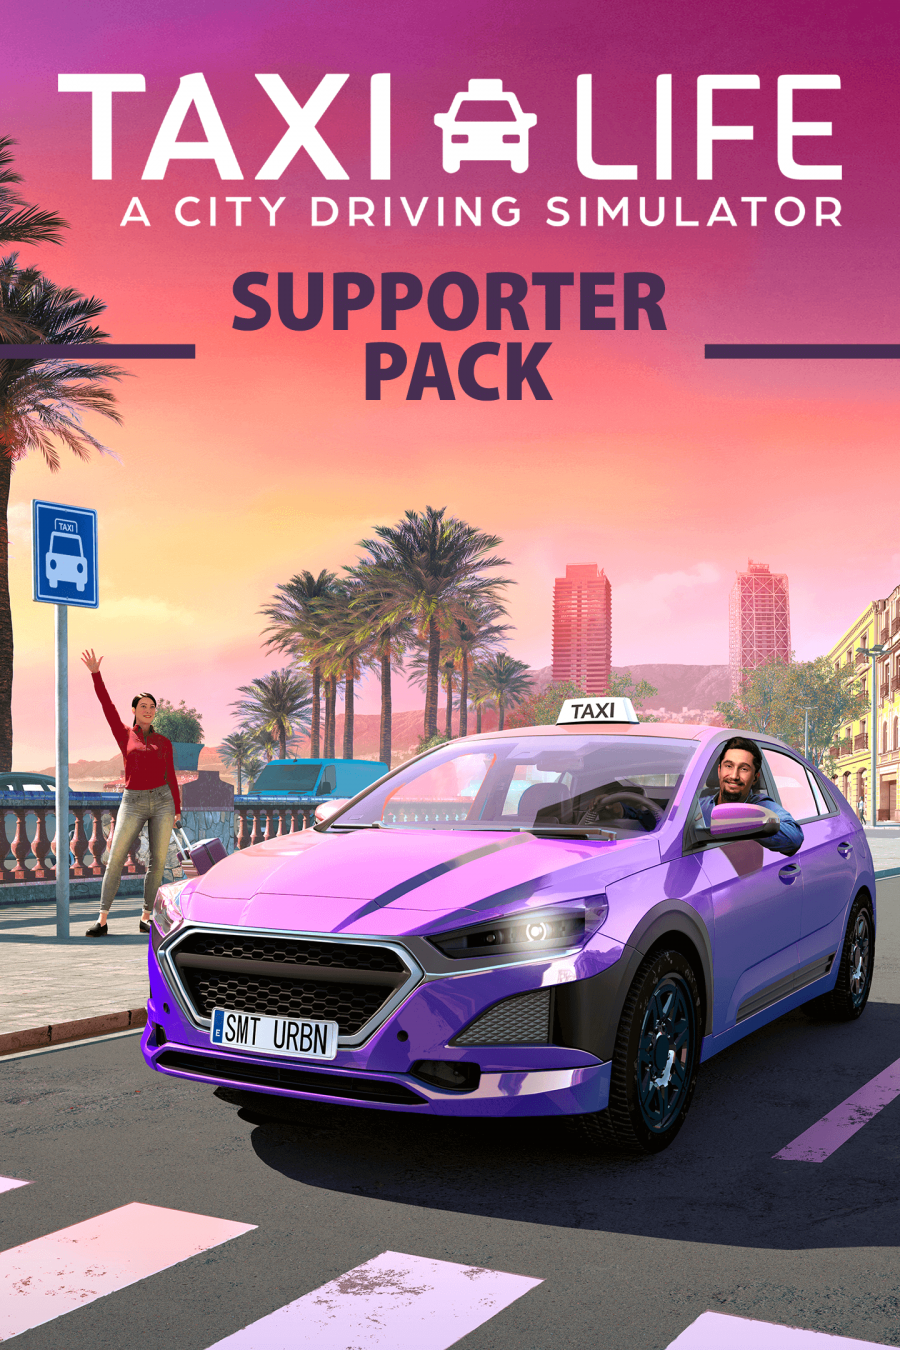 Taxi Life: A City Driving Simulator - Supporter Pack (PC)